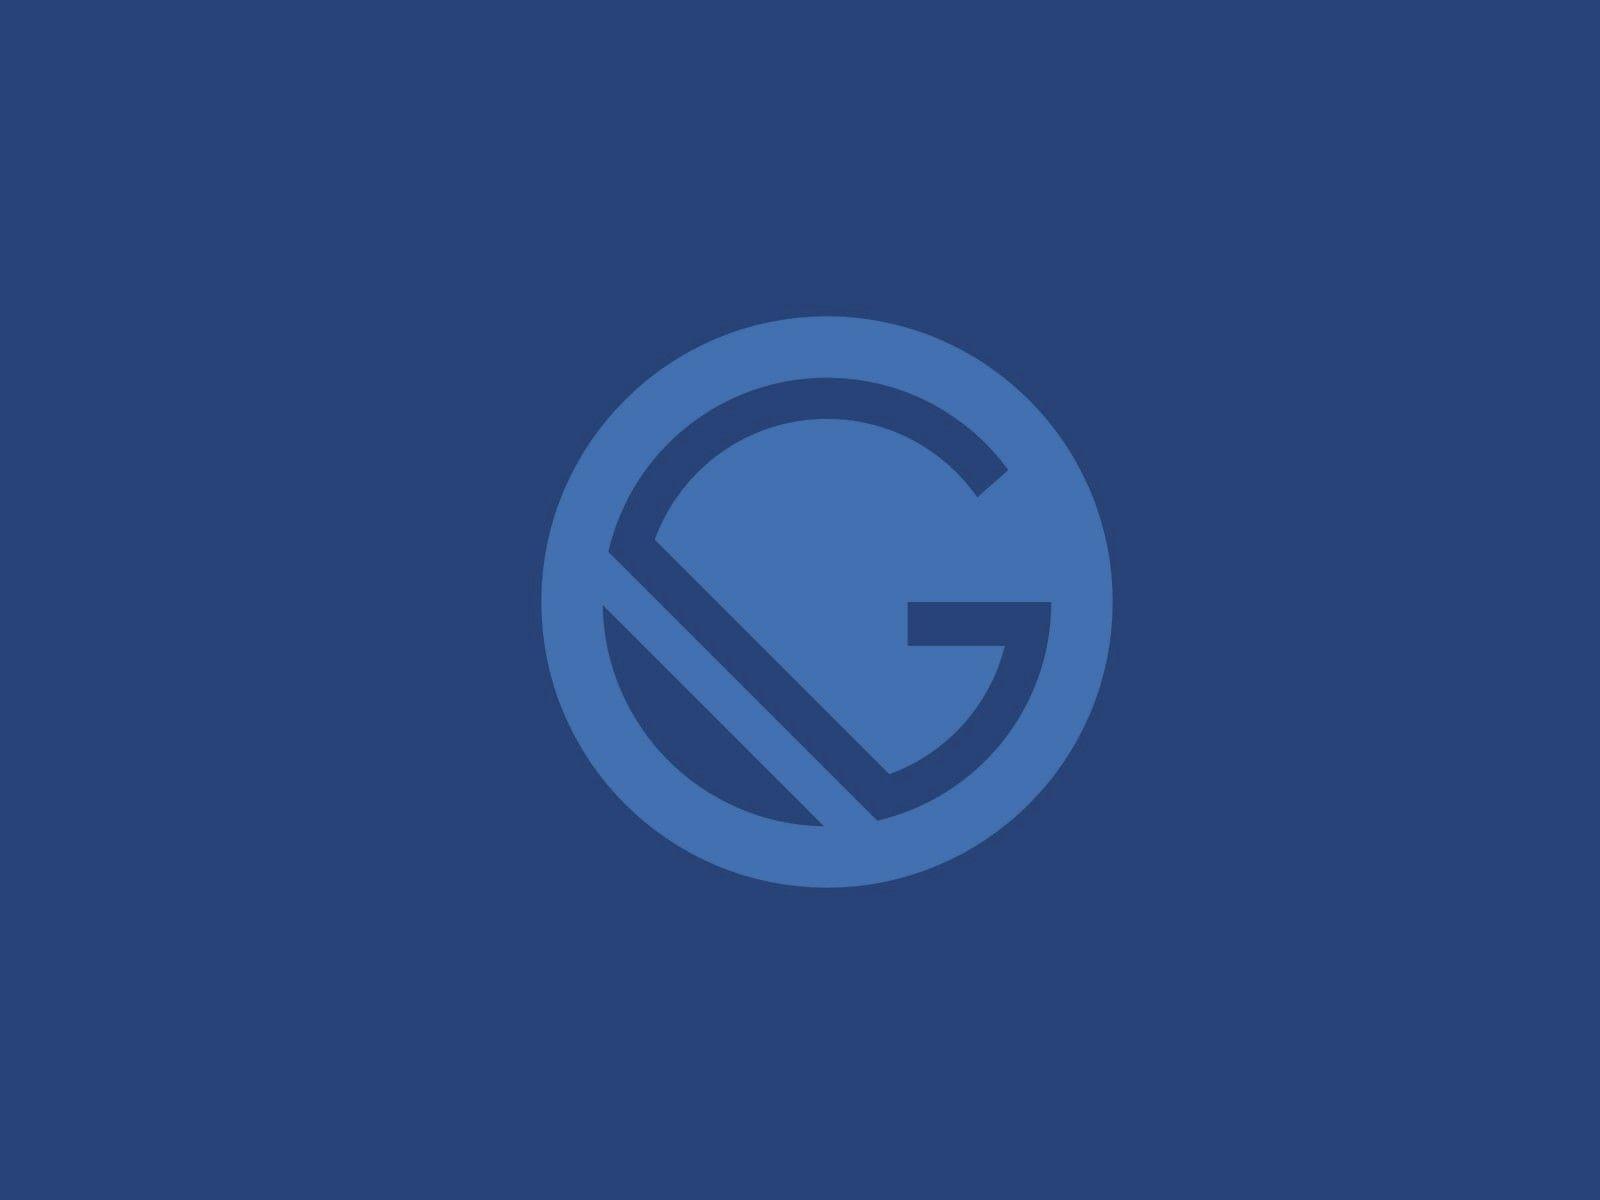 Gatsby Logo - Guide to Building a Gatsby Site From the Ground Up | JustinFormentin ...